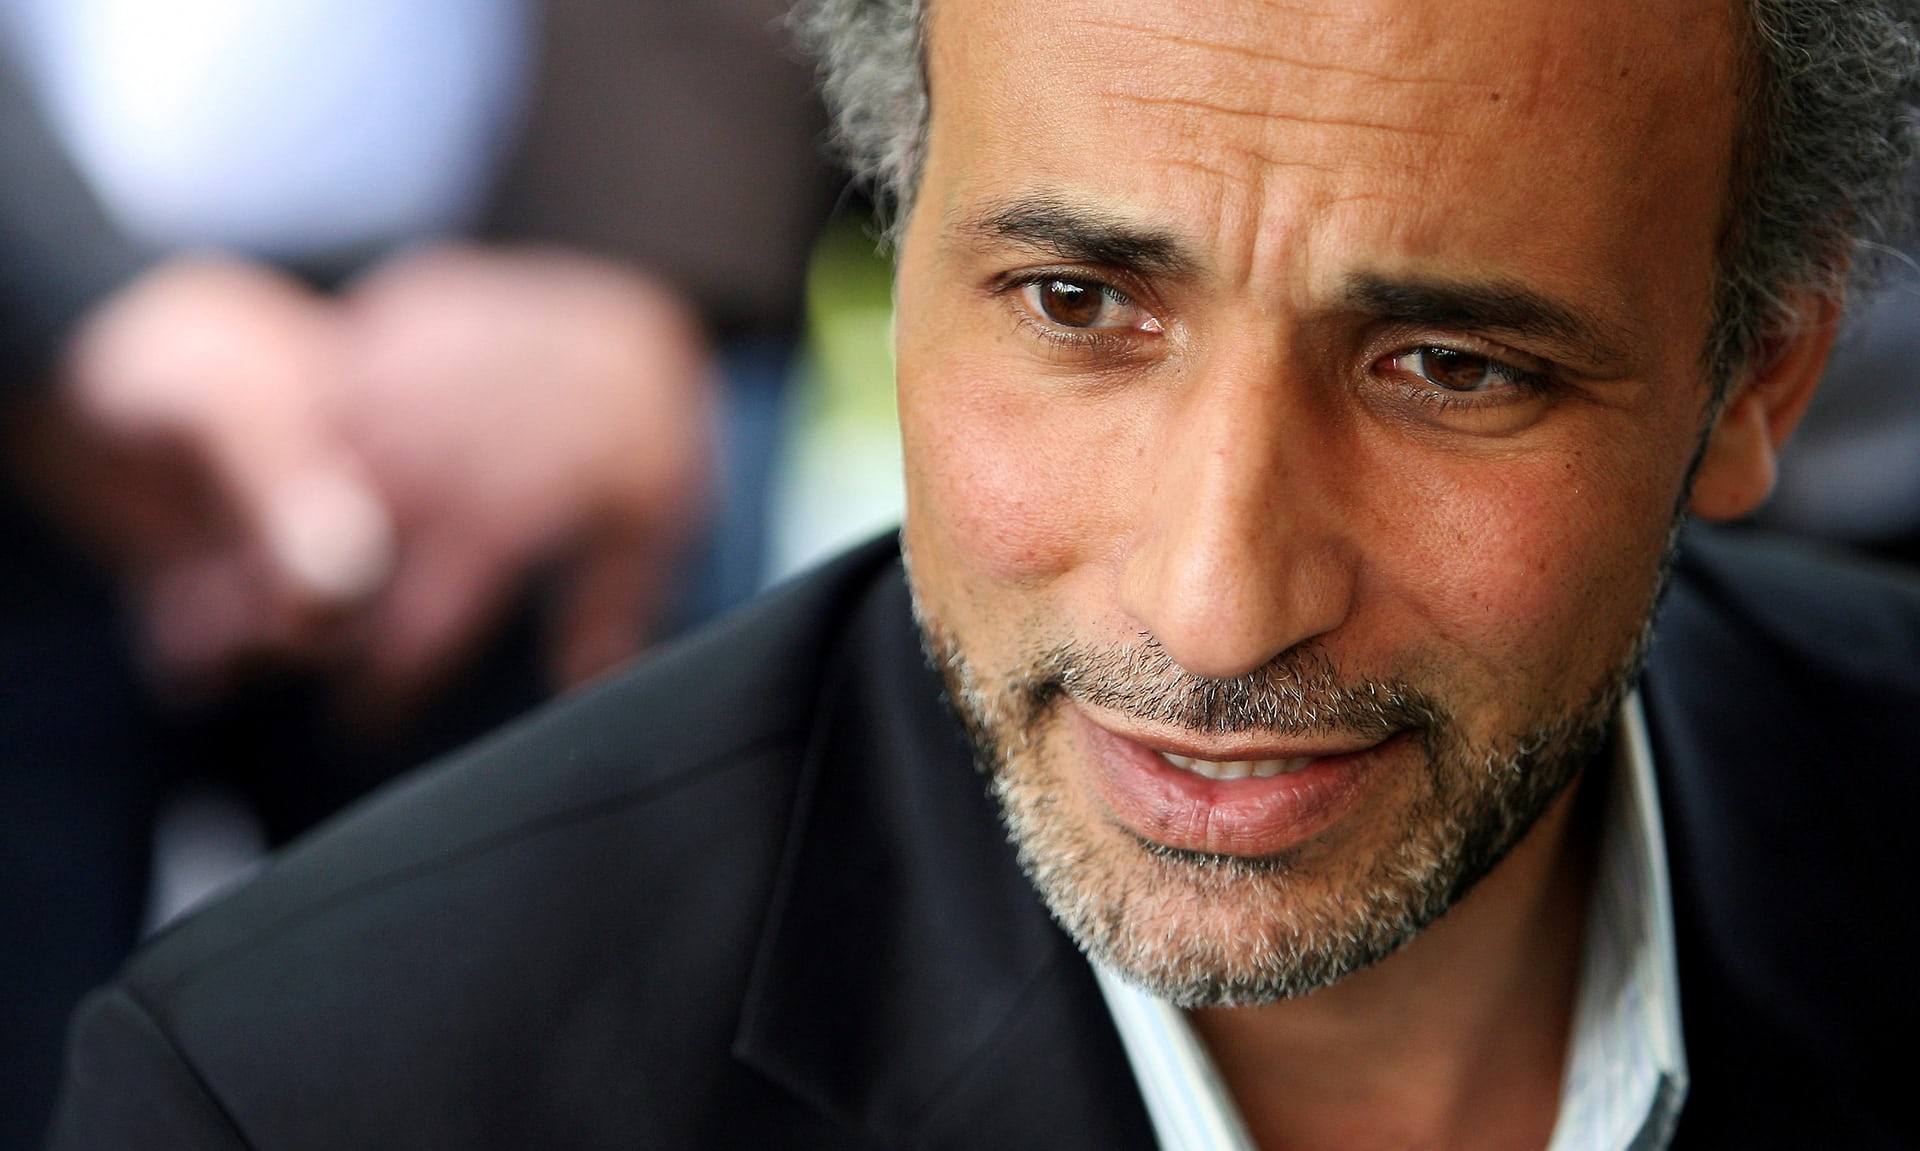 Tariq Ramadan’s Case: The Infringement of Human Rights under Legal Disguise